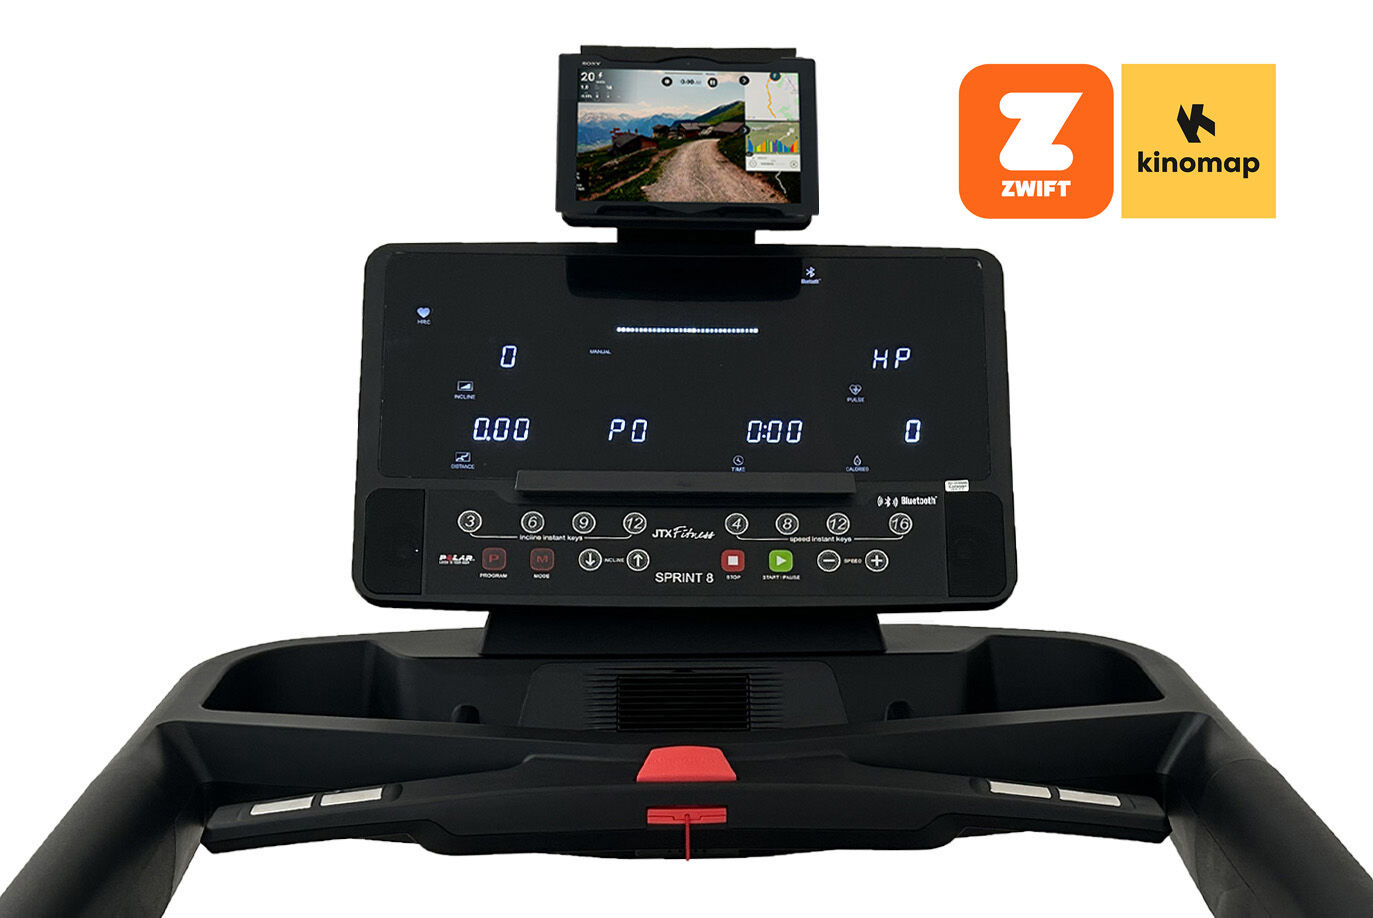 JTX Sprint 8 Pro Console with Zwift and Kinomap